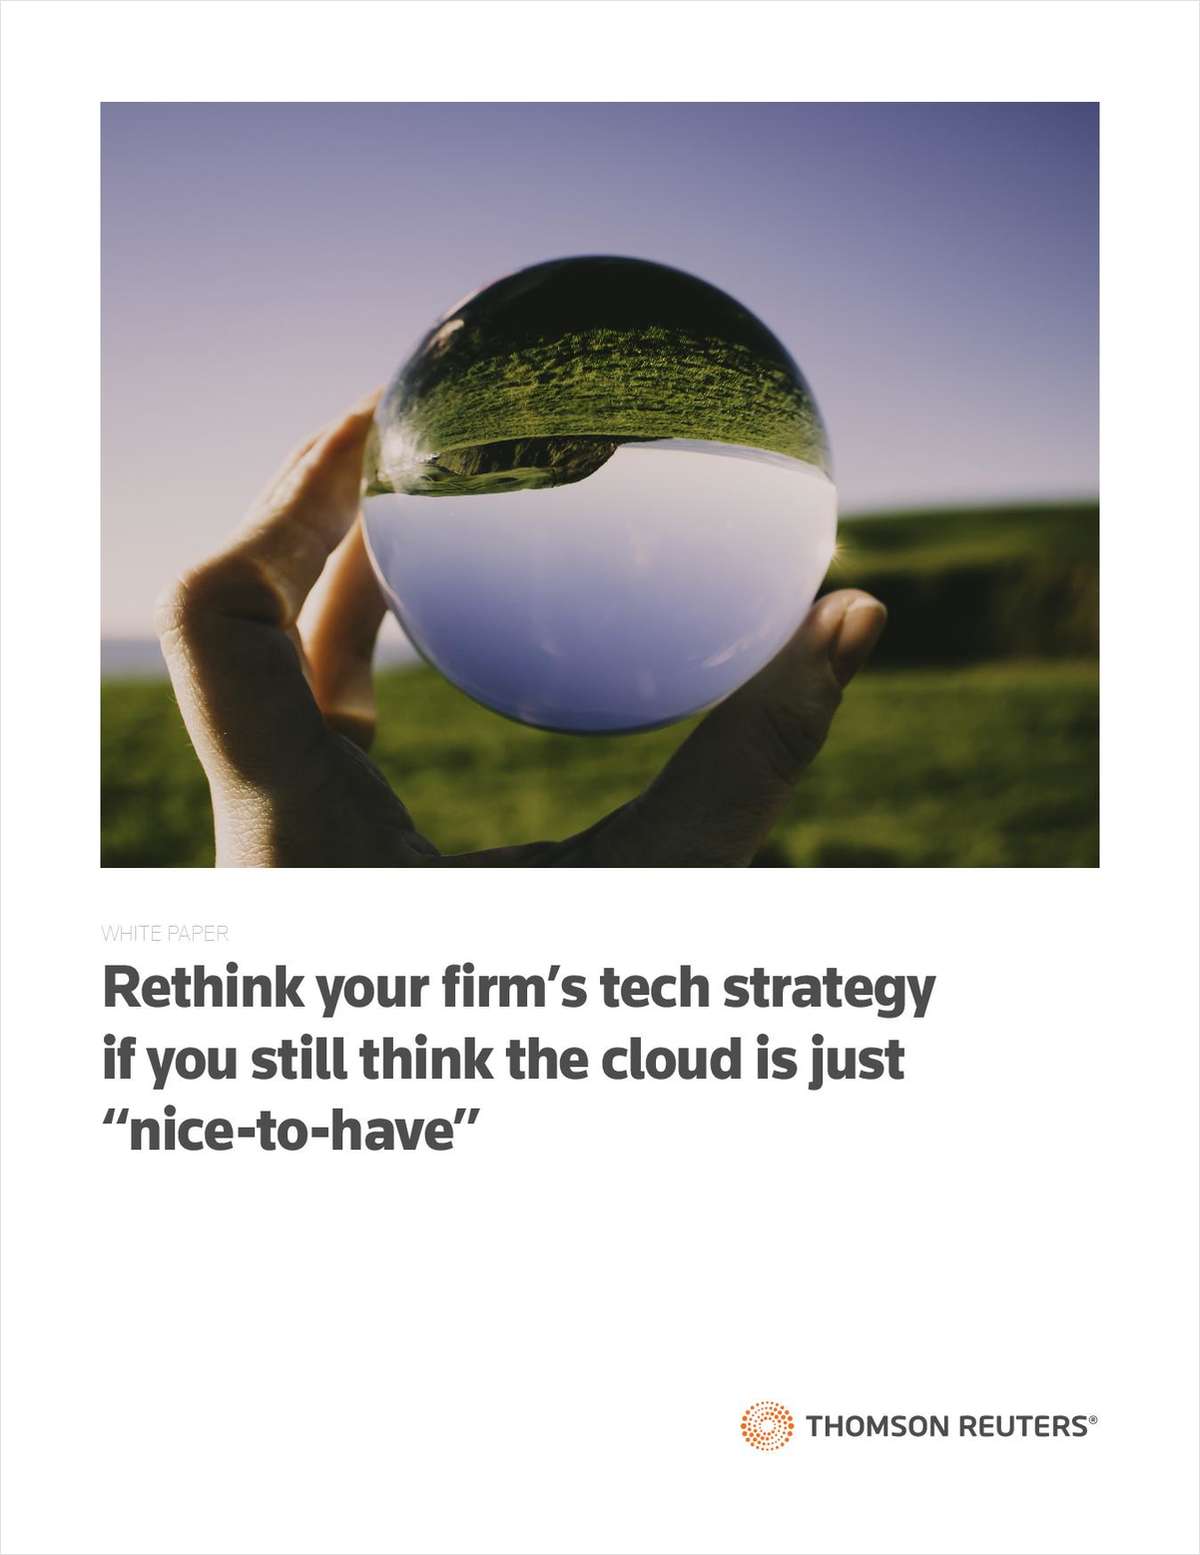 Rethink Your Firm's Tech Strategy if You Still Think the Cloud is Just 'Nice-to-Have'